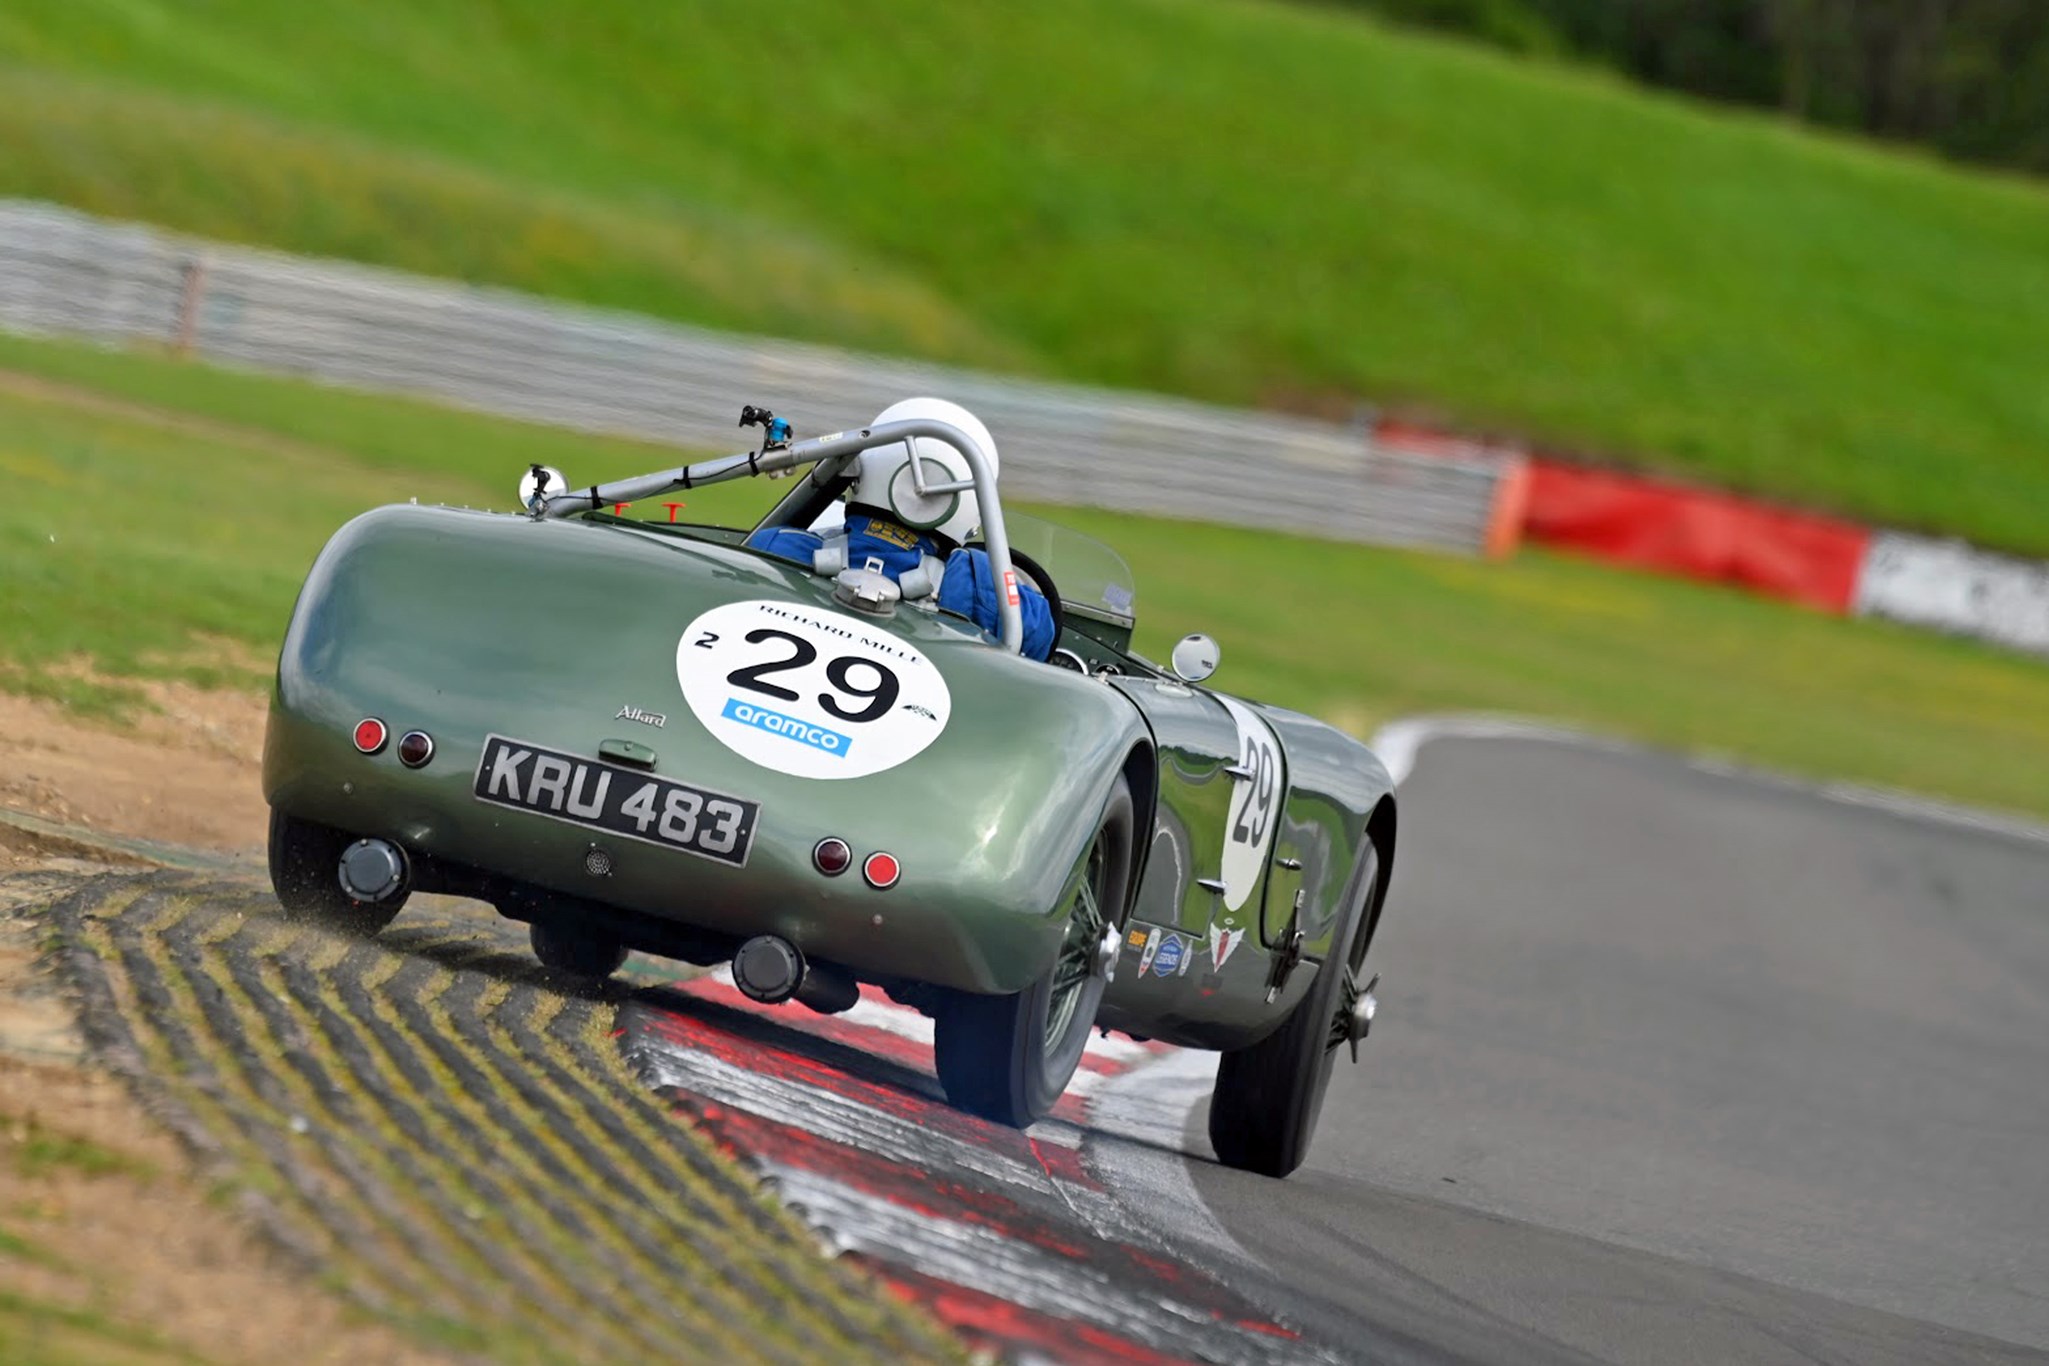 Gareth Evans driving an Allard J2X Le Mans from 1952. He's raced this at Goodwood Revival, Le Mans Classic, Silverstone Classic and plenty more besides